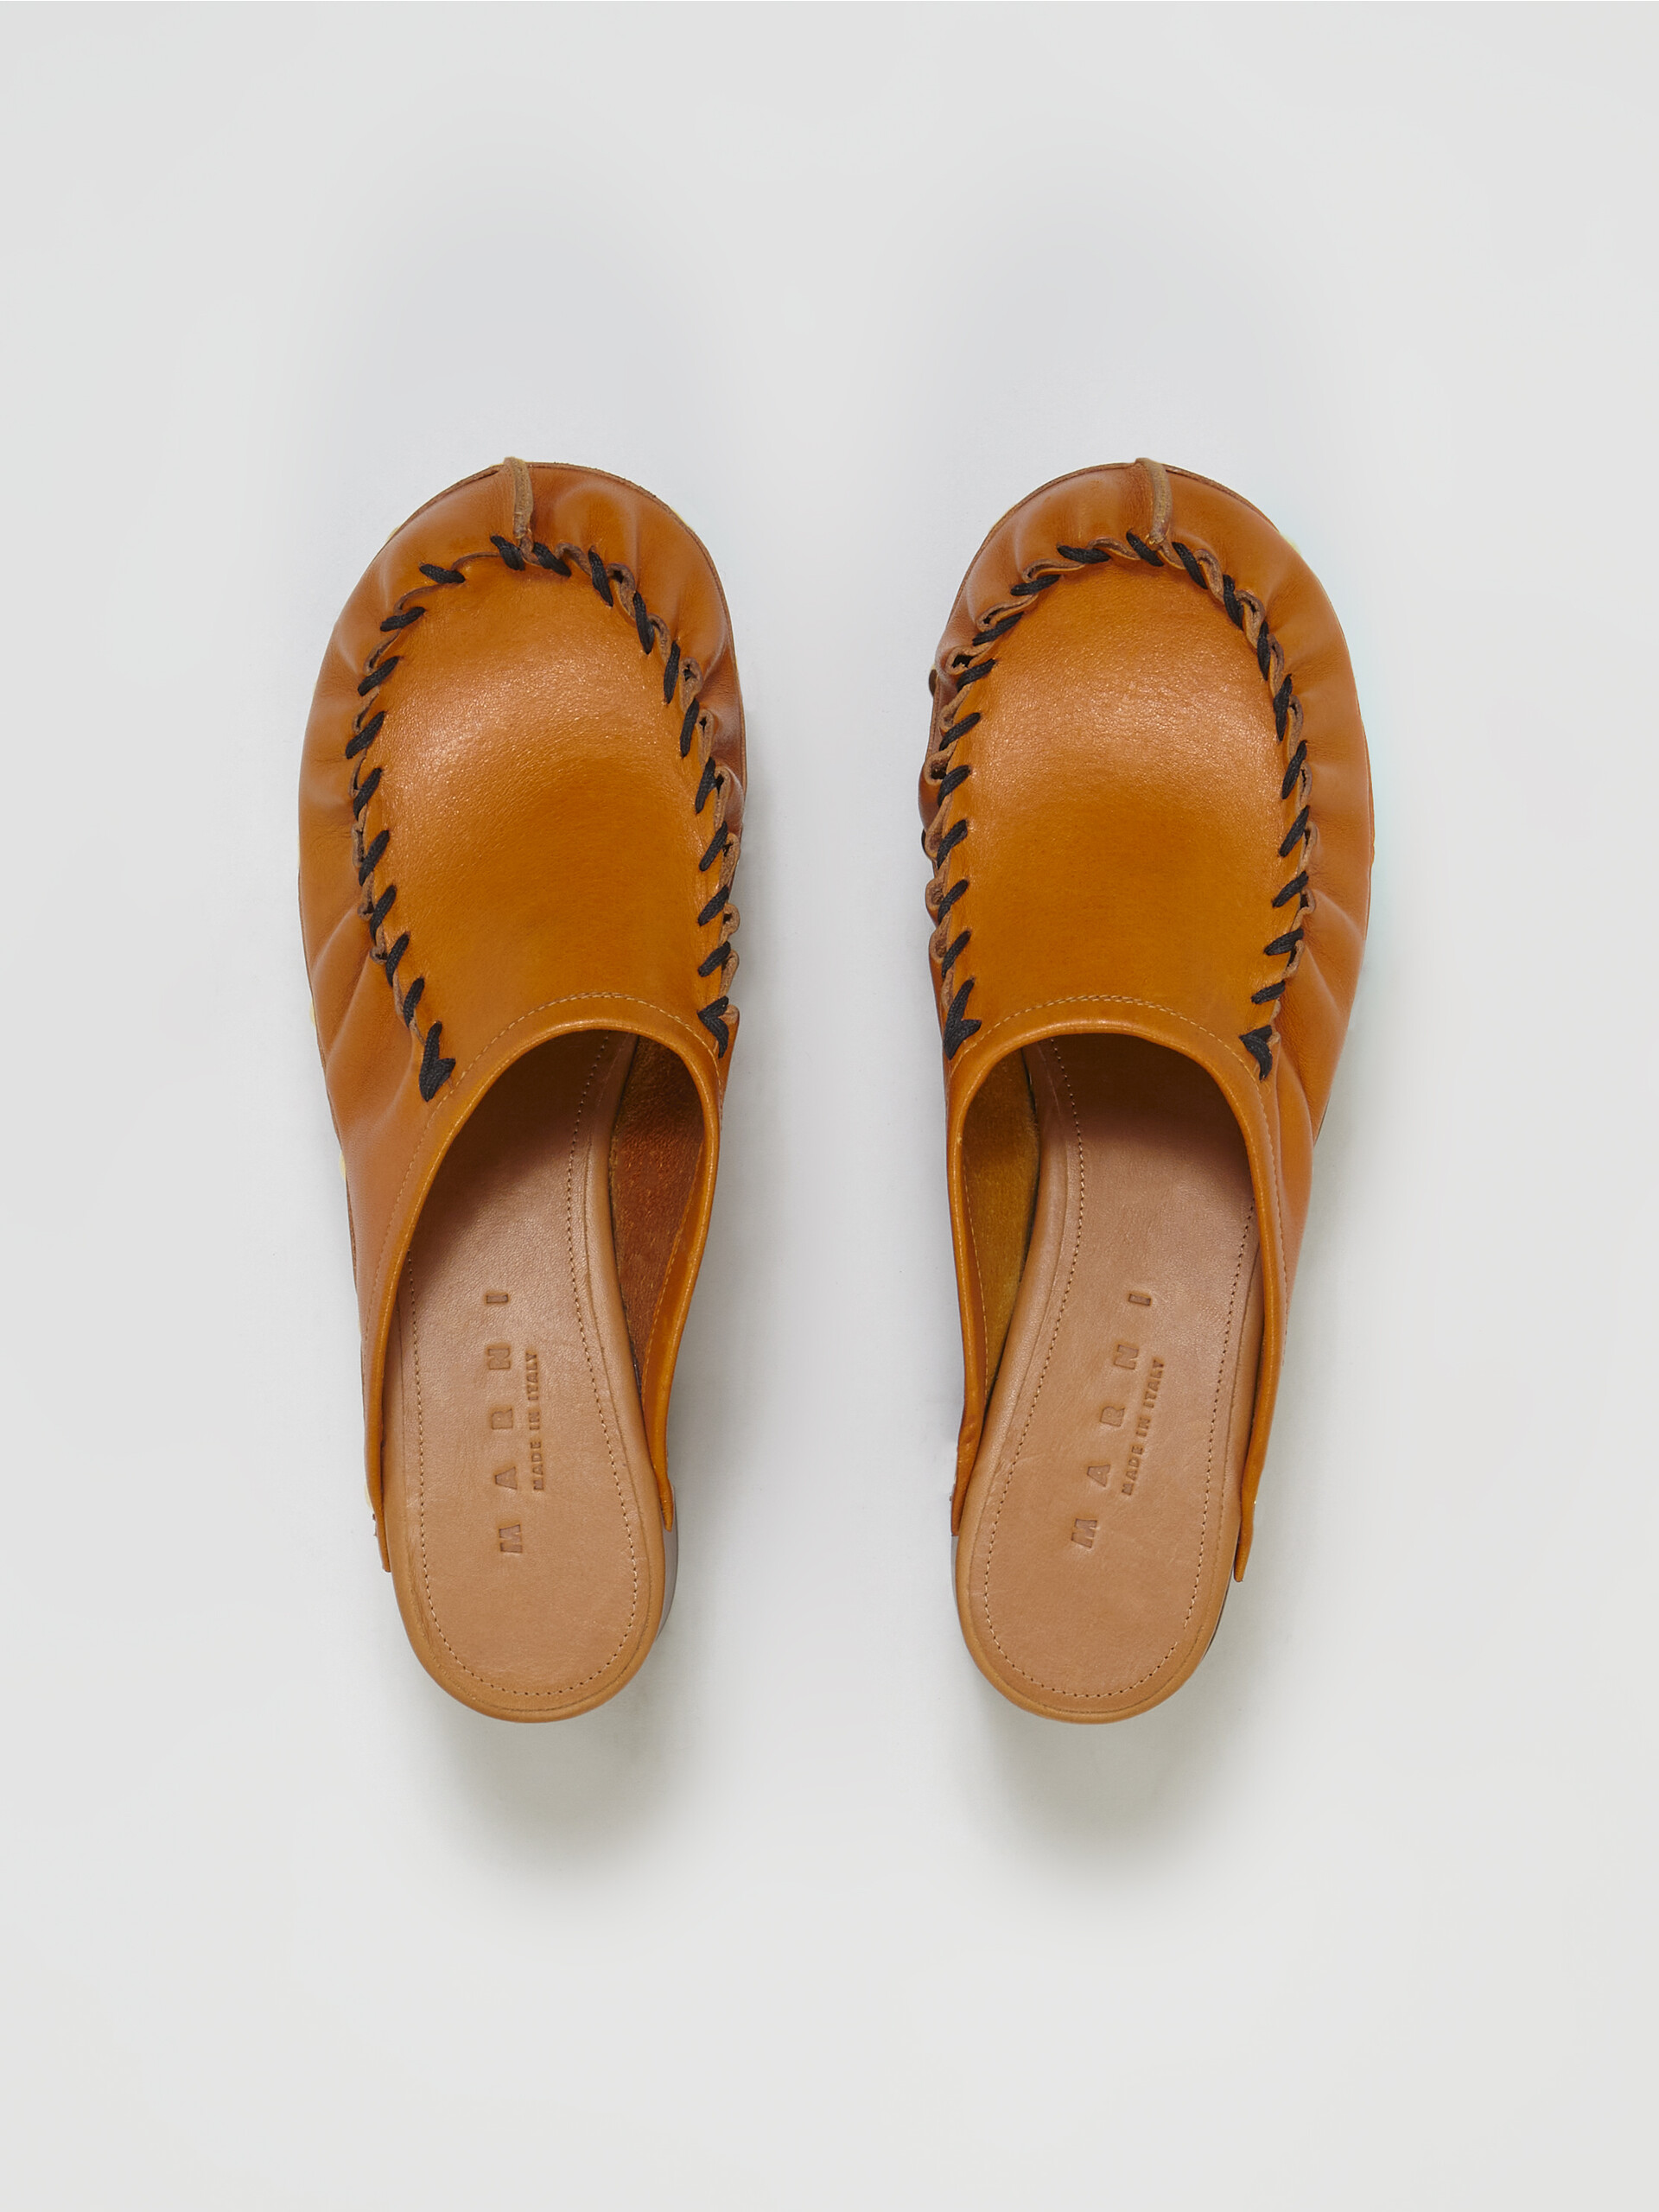 Vegetable-tanned leather sabot - Clogs - Image 4